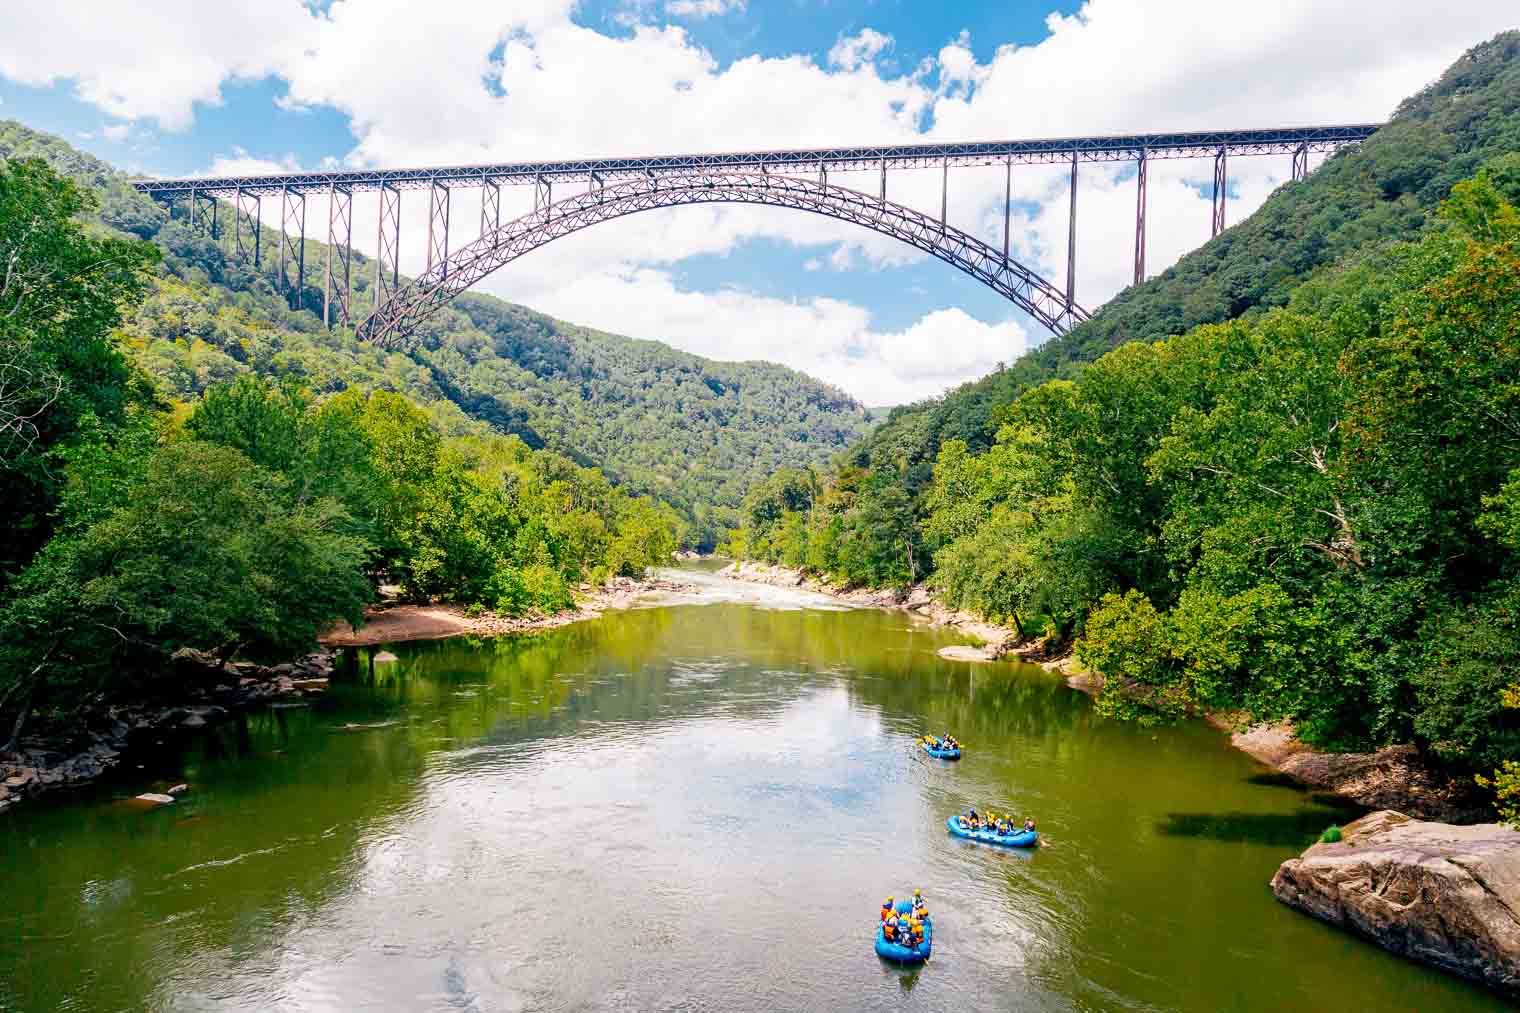 Rafting on the New River in West Virginia